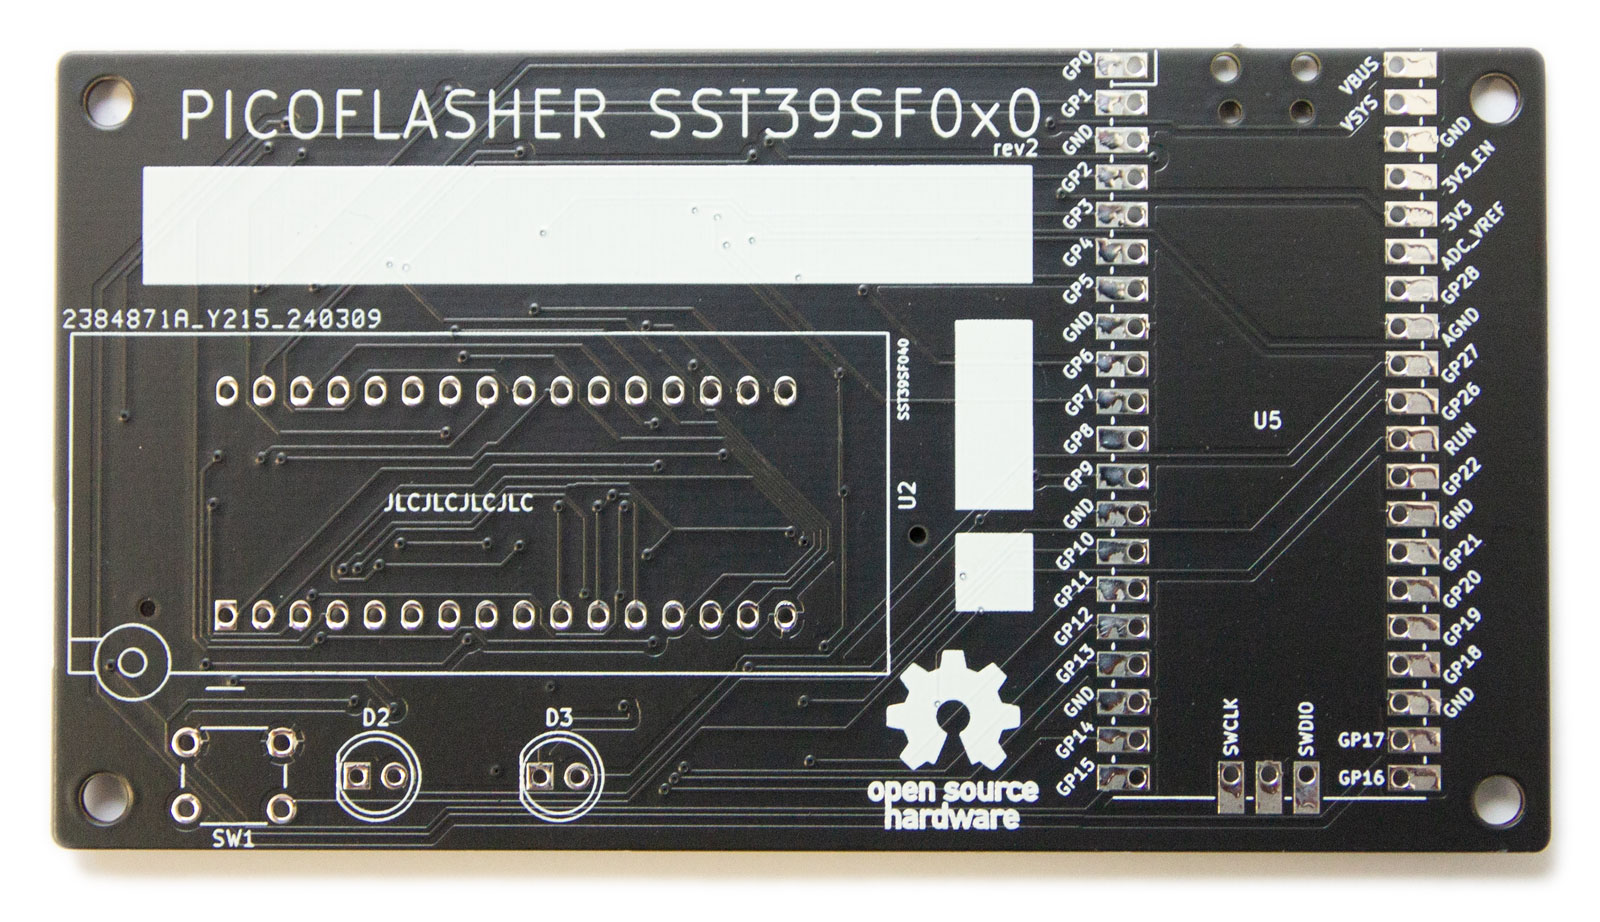 pico-flasher-pcb-front.jpg